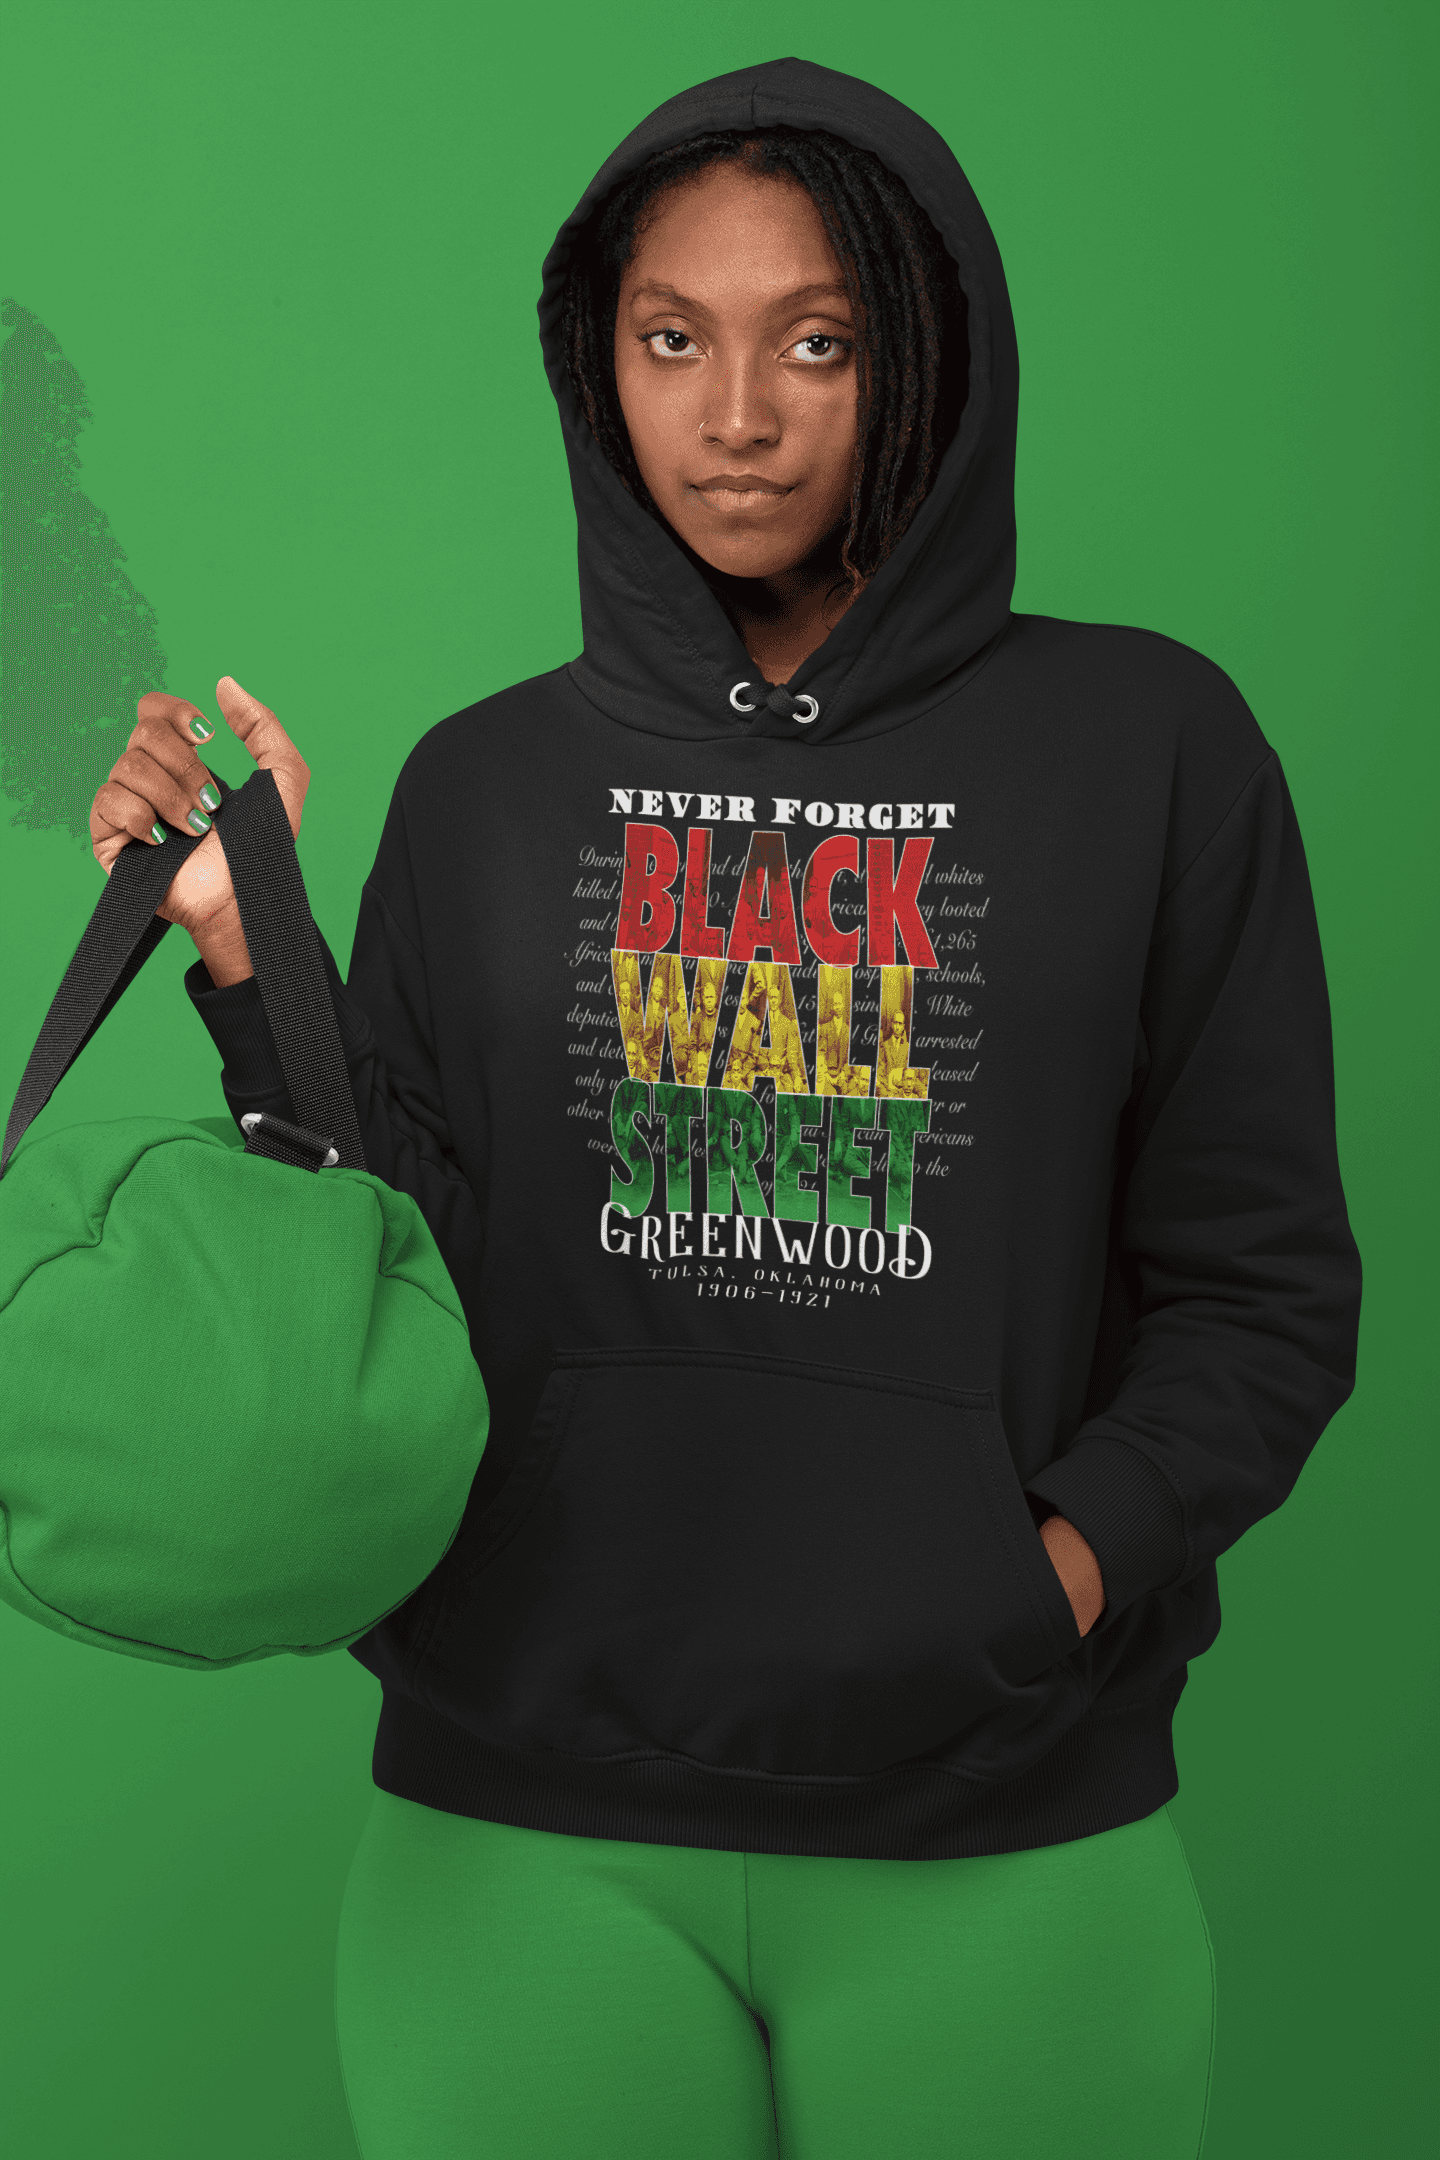 woman in a hoodie with black history design holding a bag monochromatic green scene